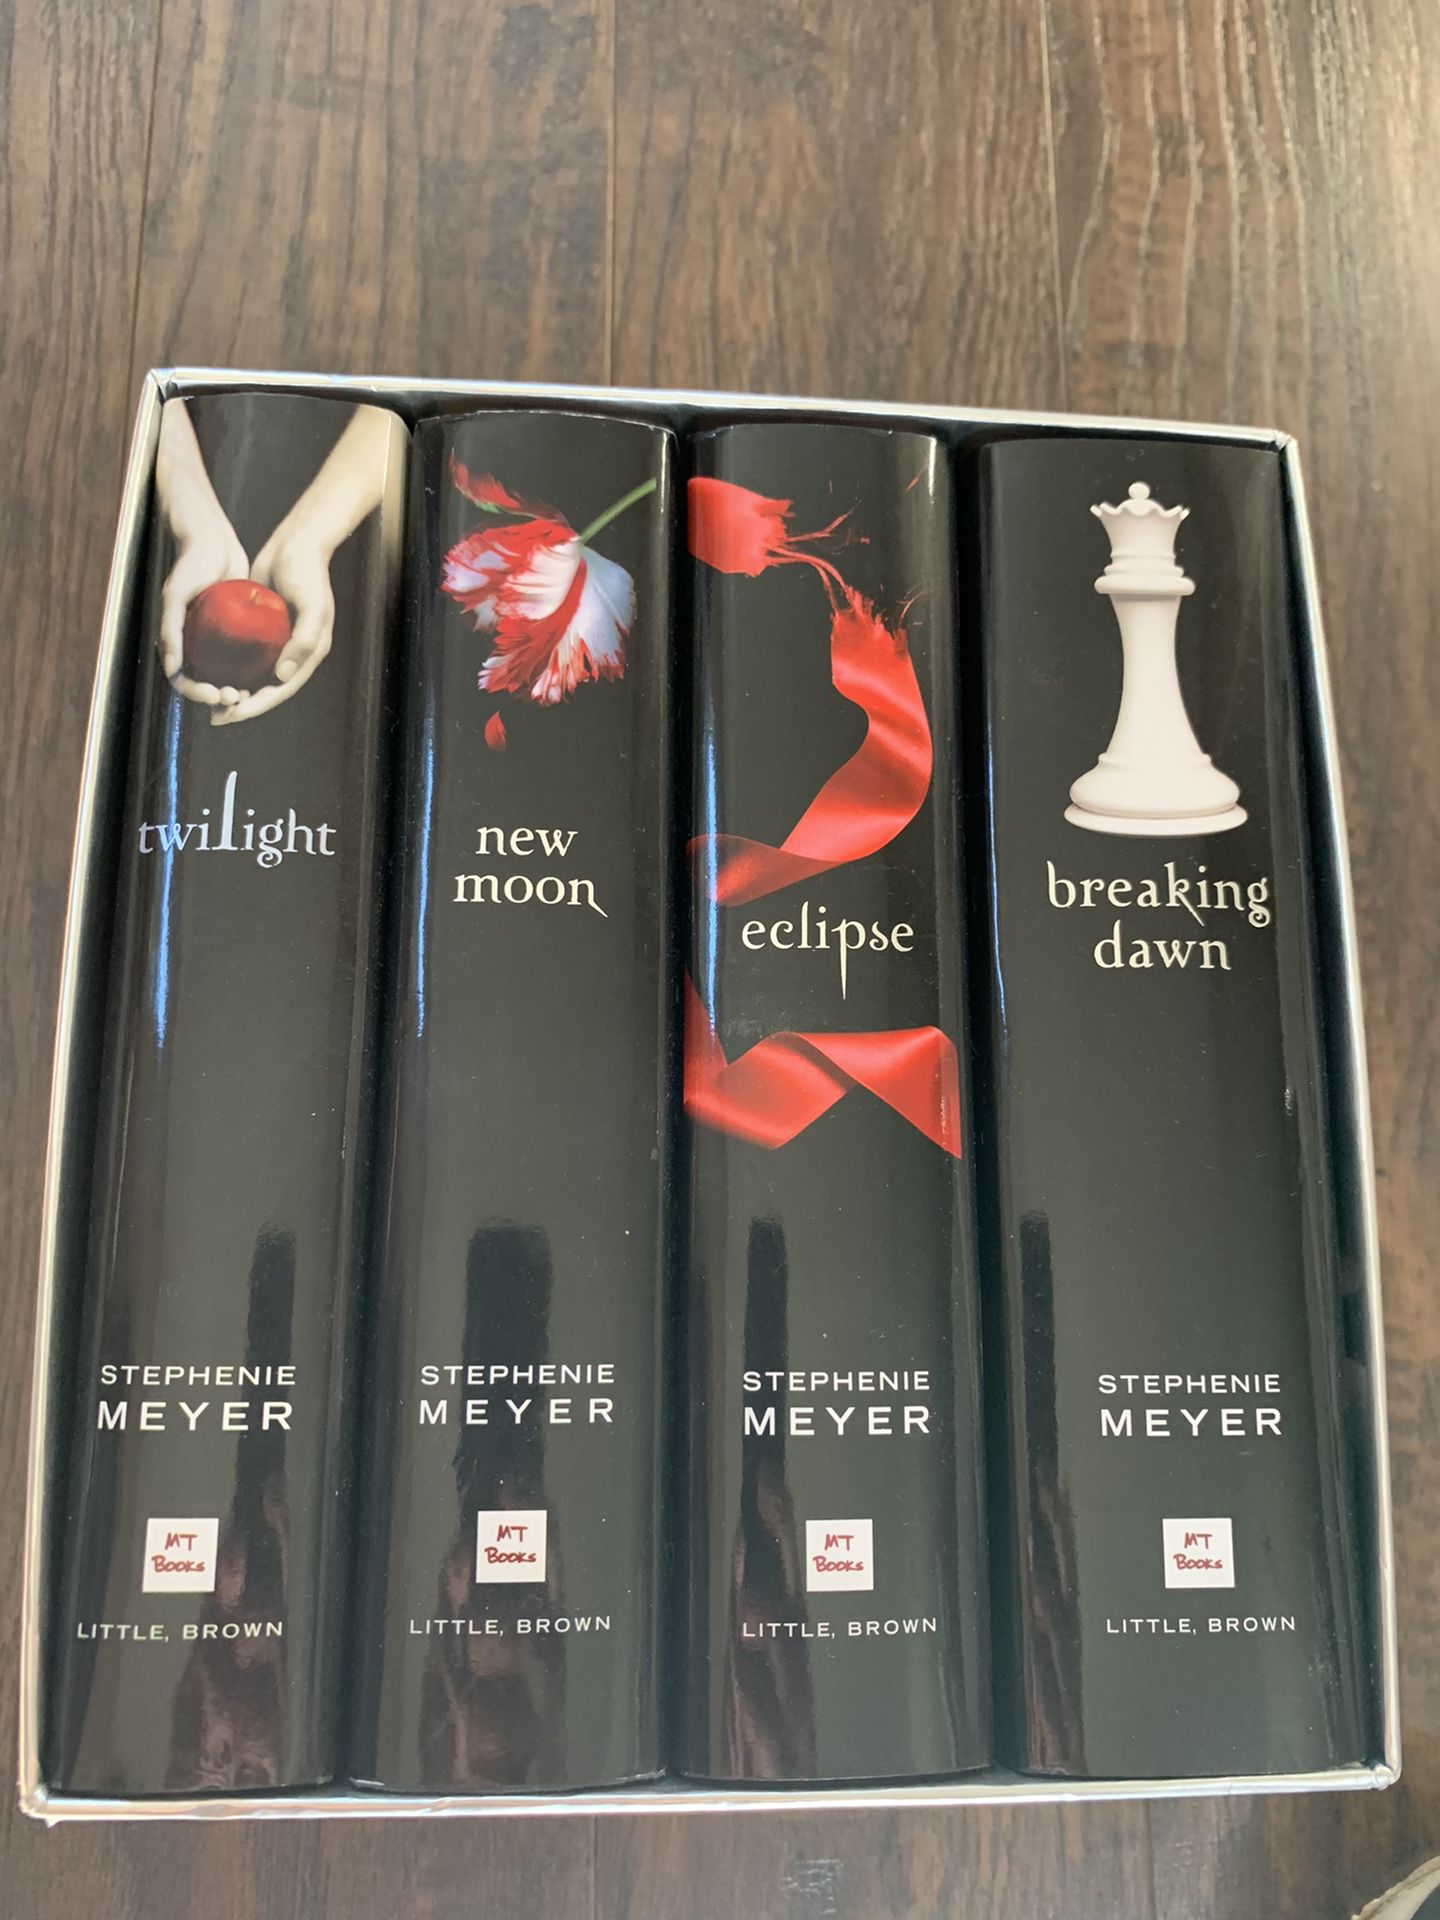 Twilight hard cover books - set of 4 for $25, each book retails for 20. Also, we have soft paperback copies of Twilight and New Moon plus extra hard